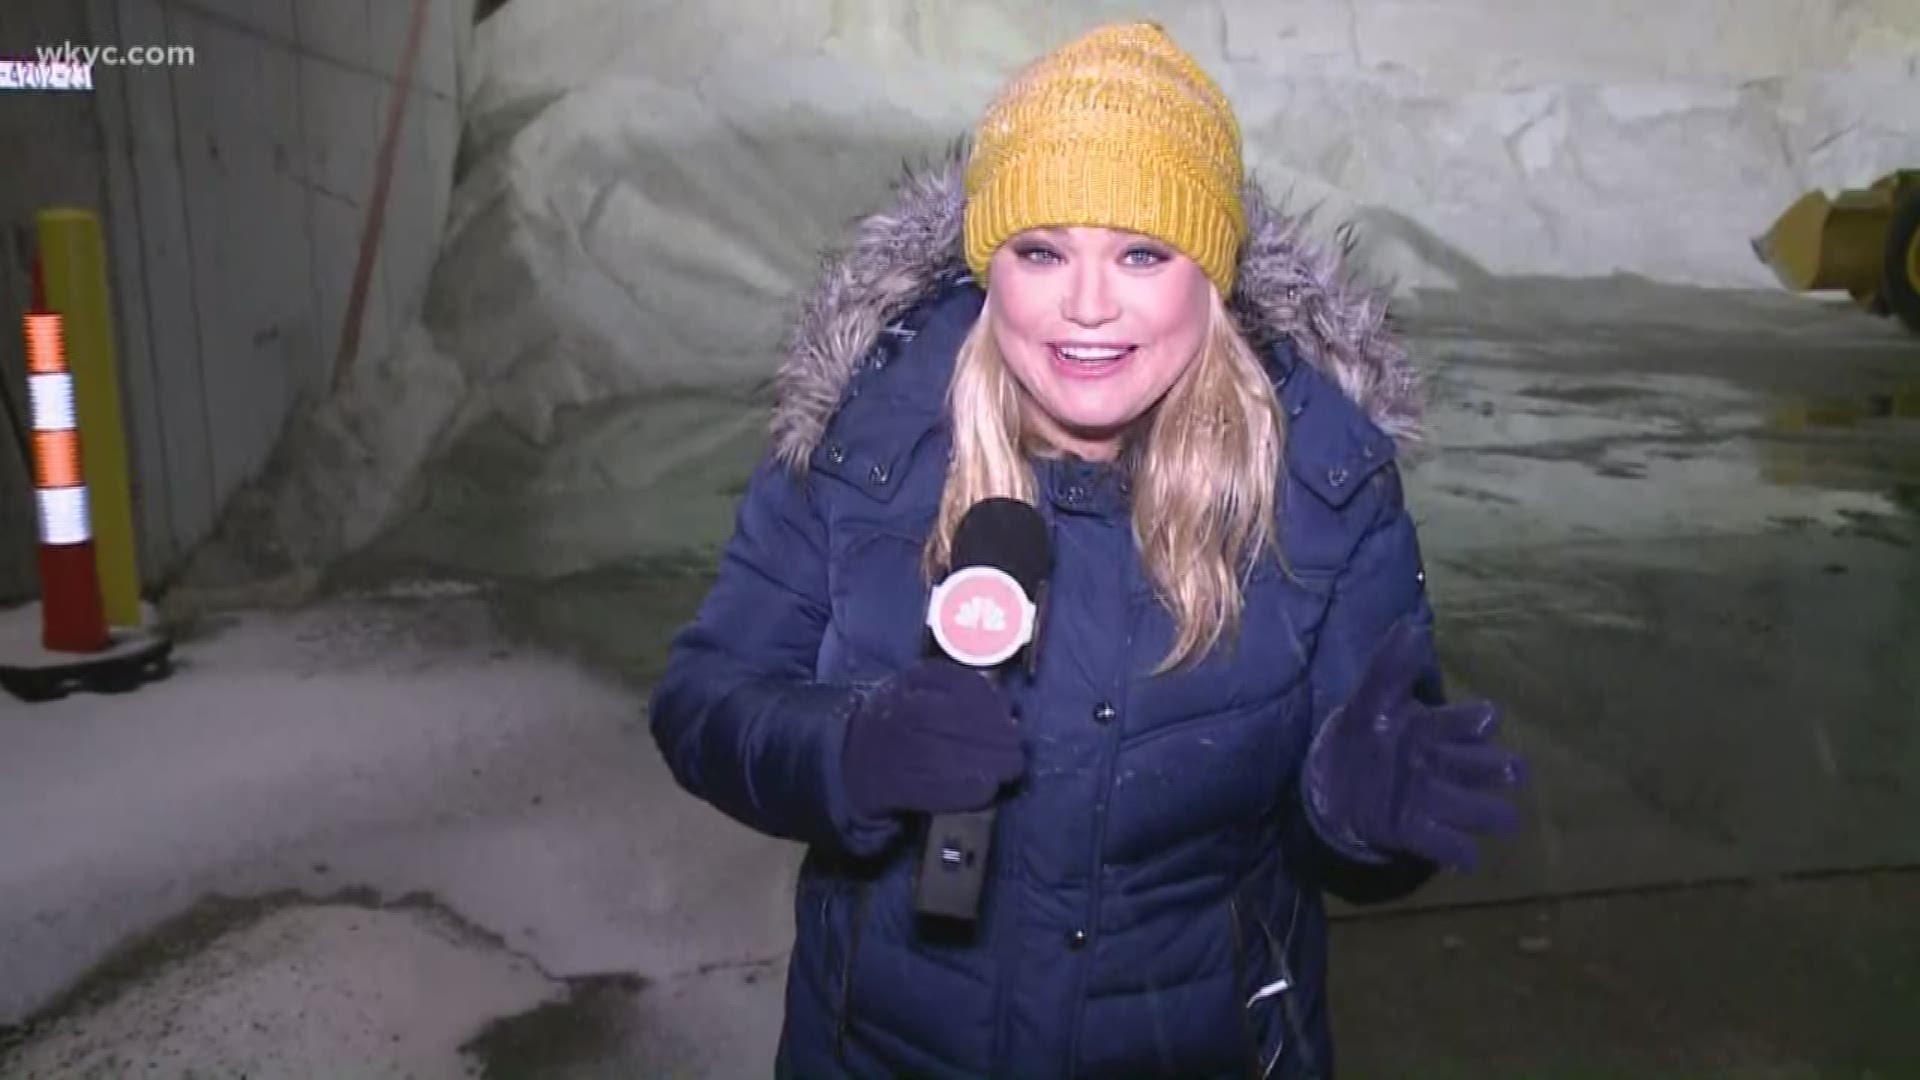 Jan. 18, 2020: It may be snowy and frigid outside, but that didn't stop the 3News team from having some fun today.